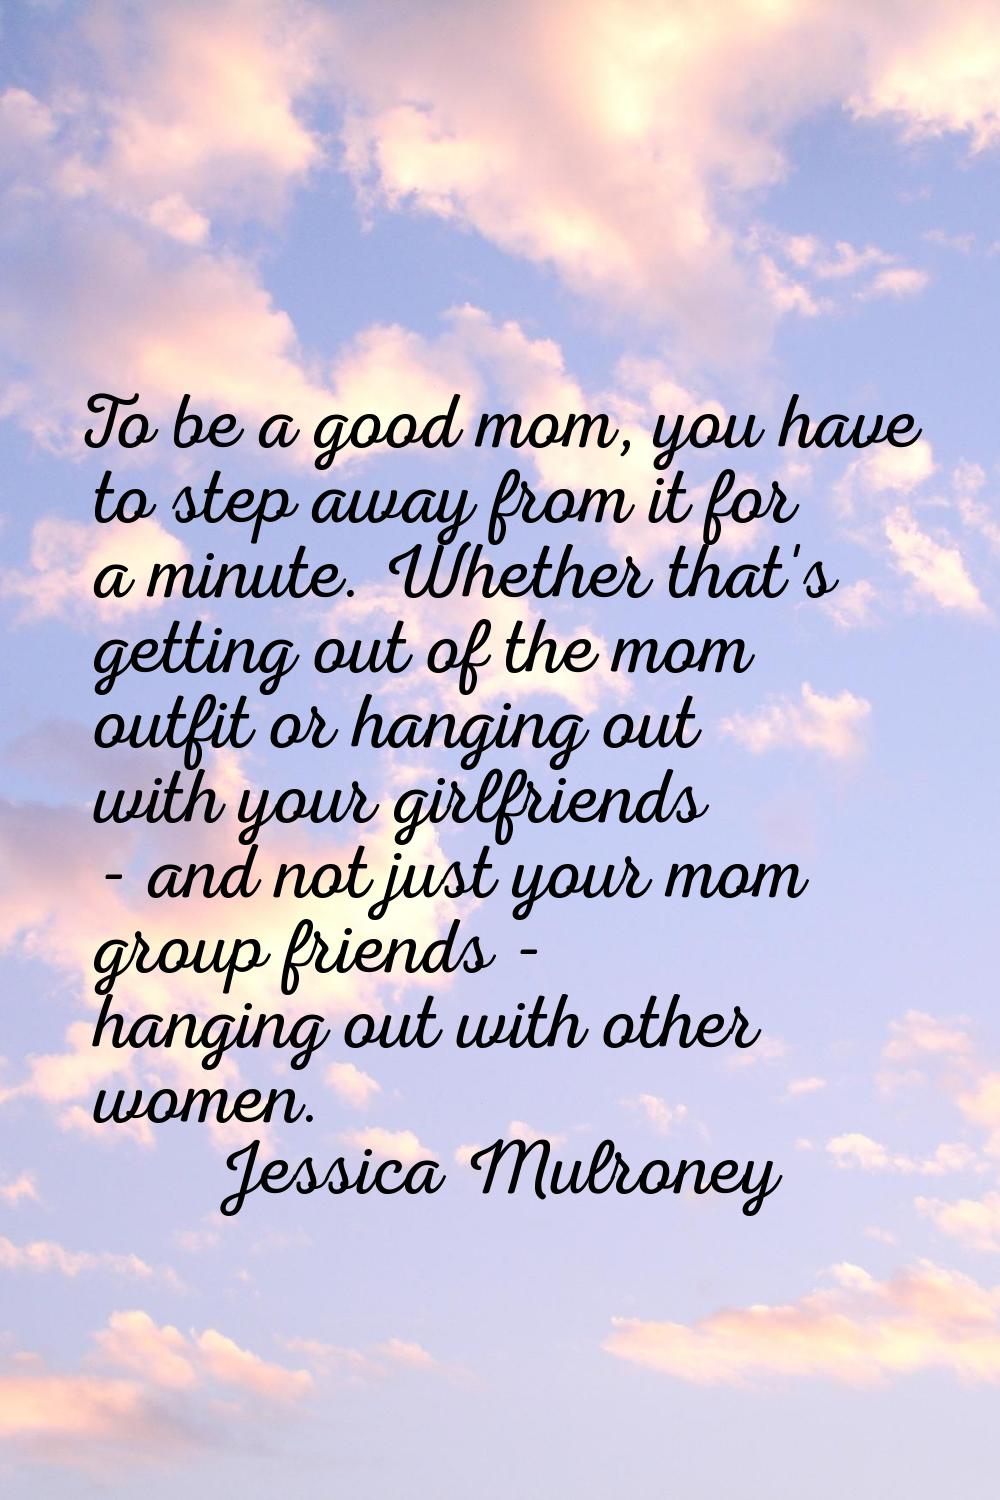 To be a good mom, you have to step away from it for a minute. Whether that's getting out of the mom